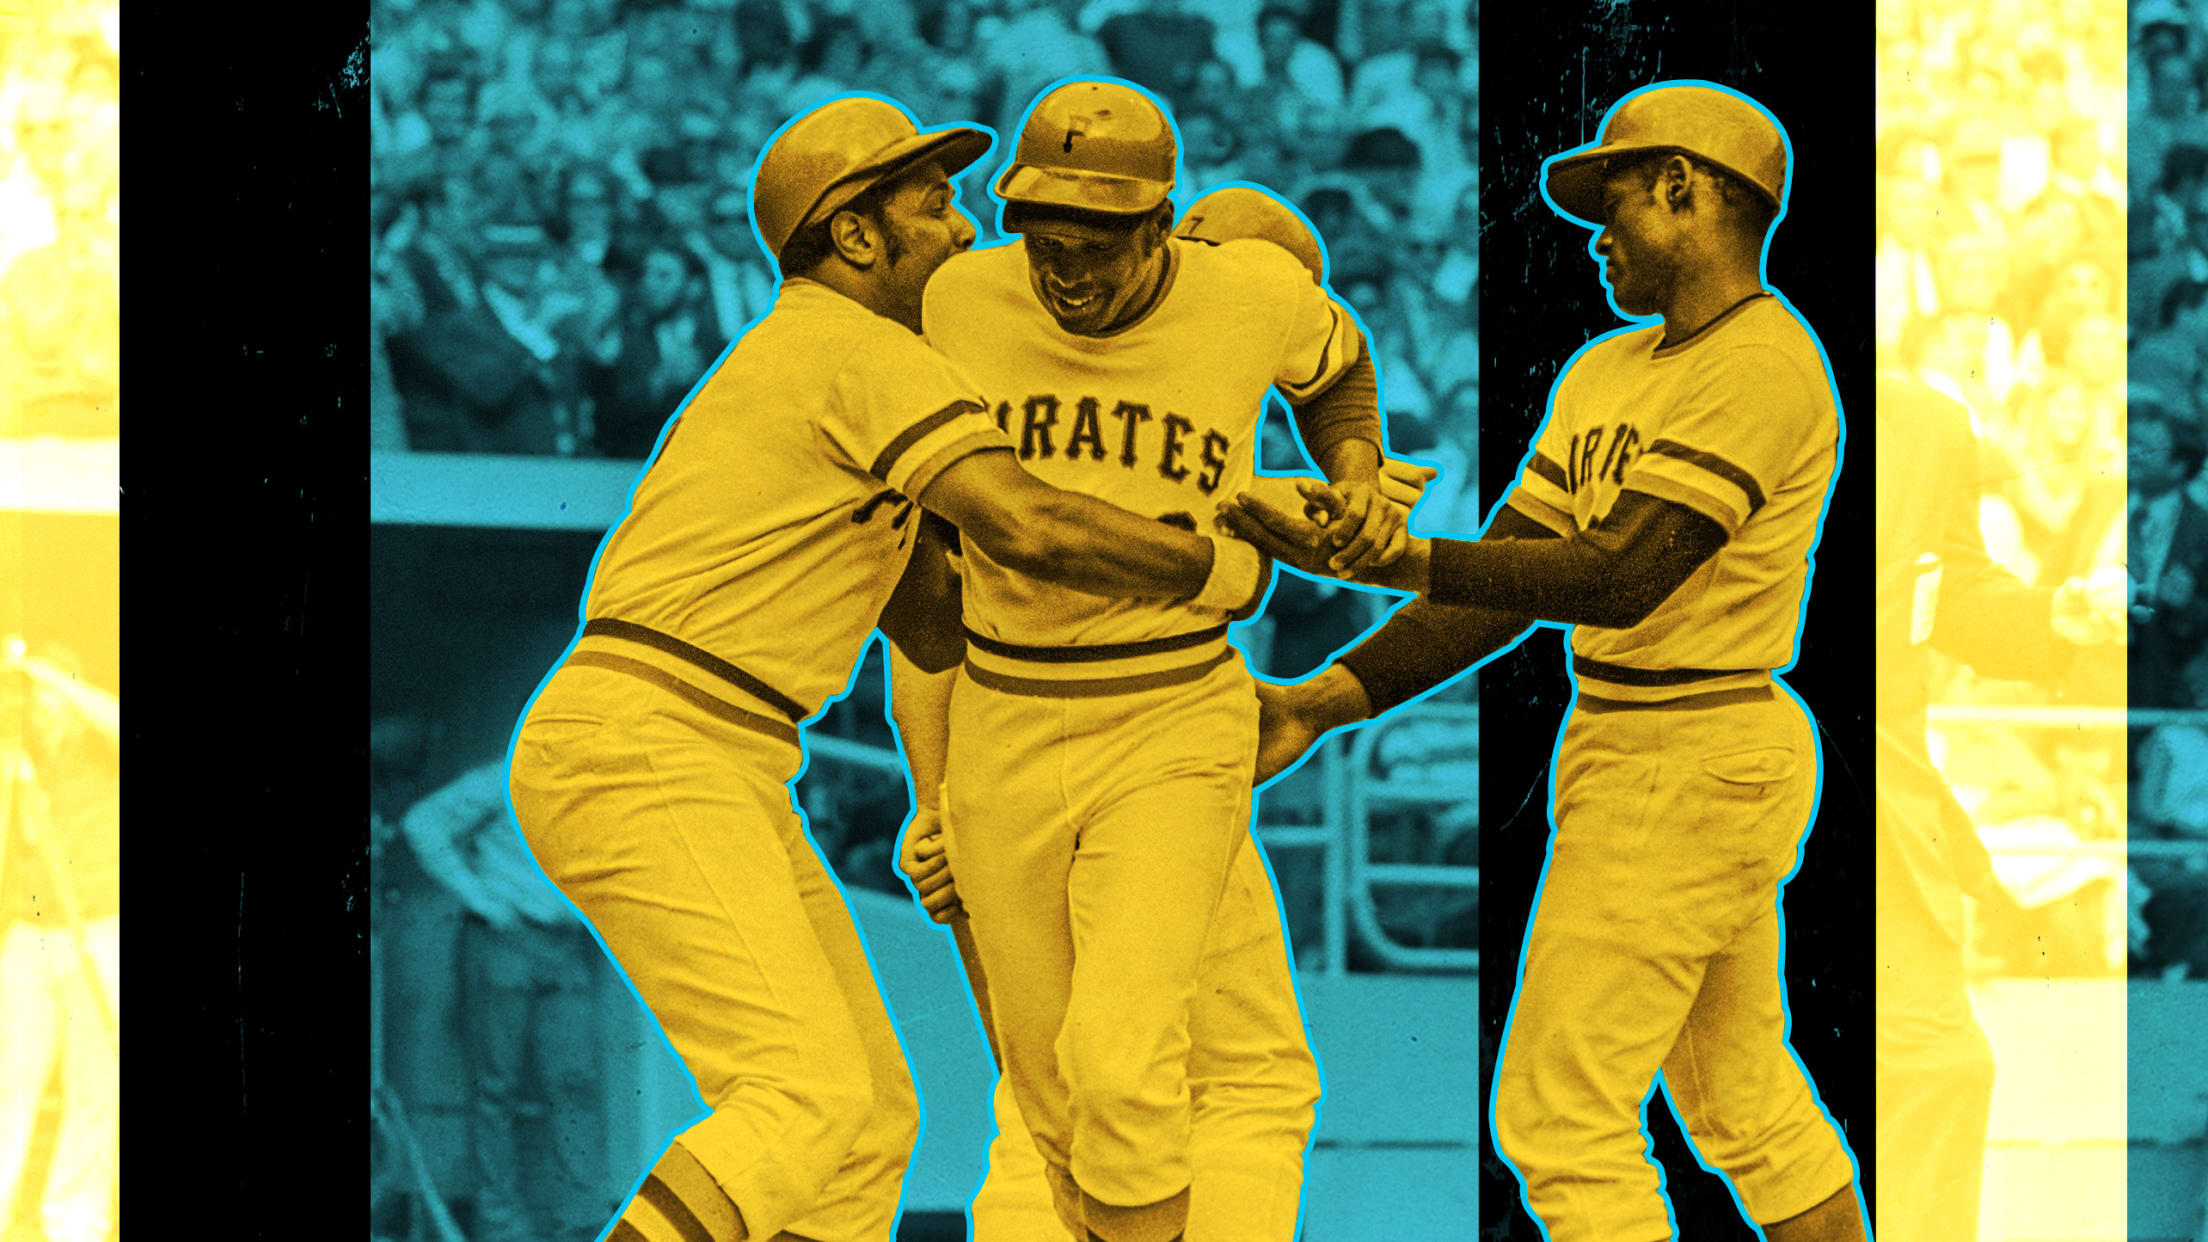 Black and Gold: The Pirates made history, statement in 1971